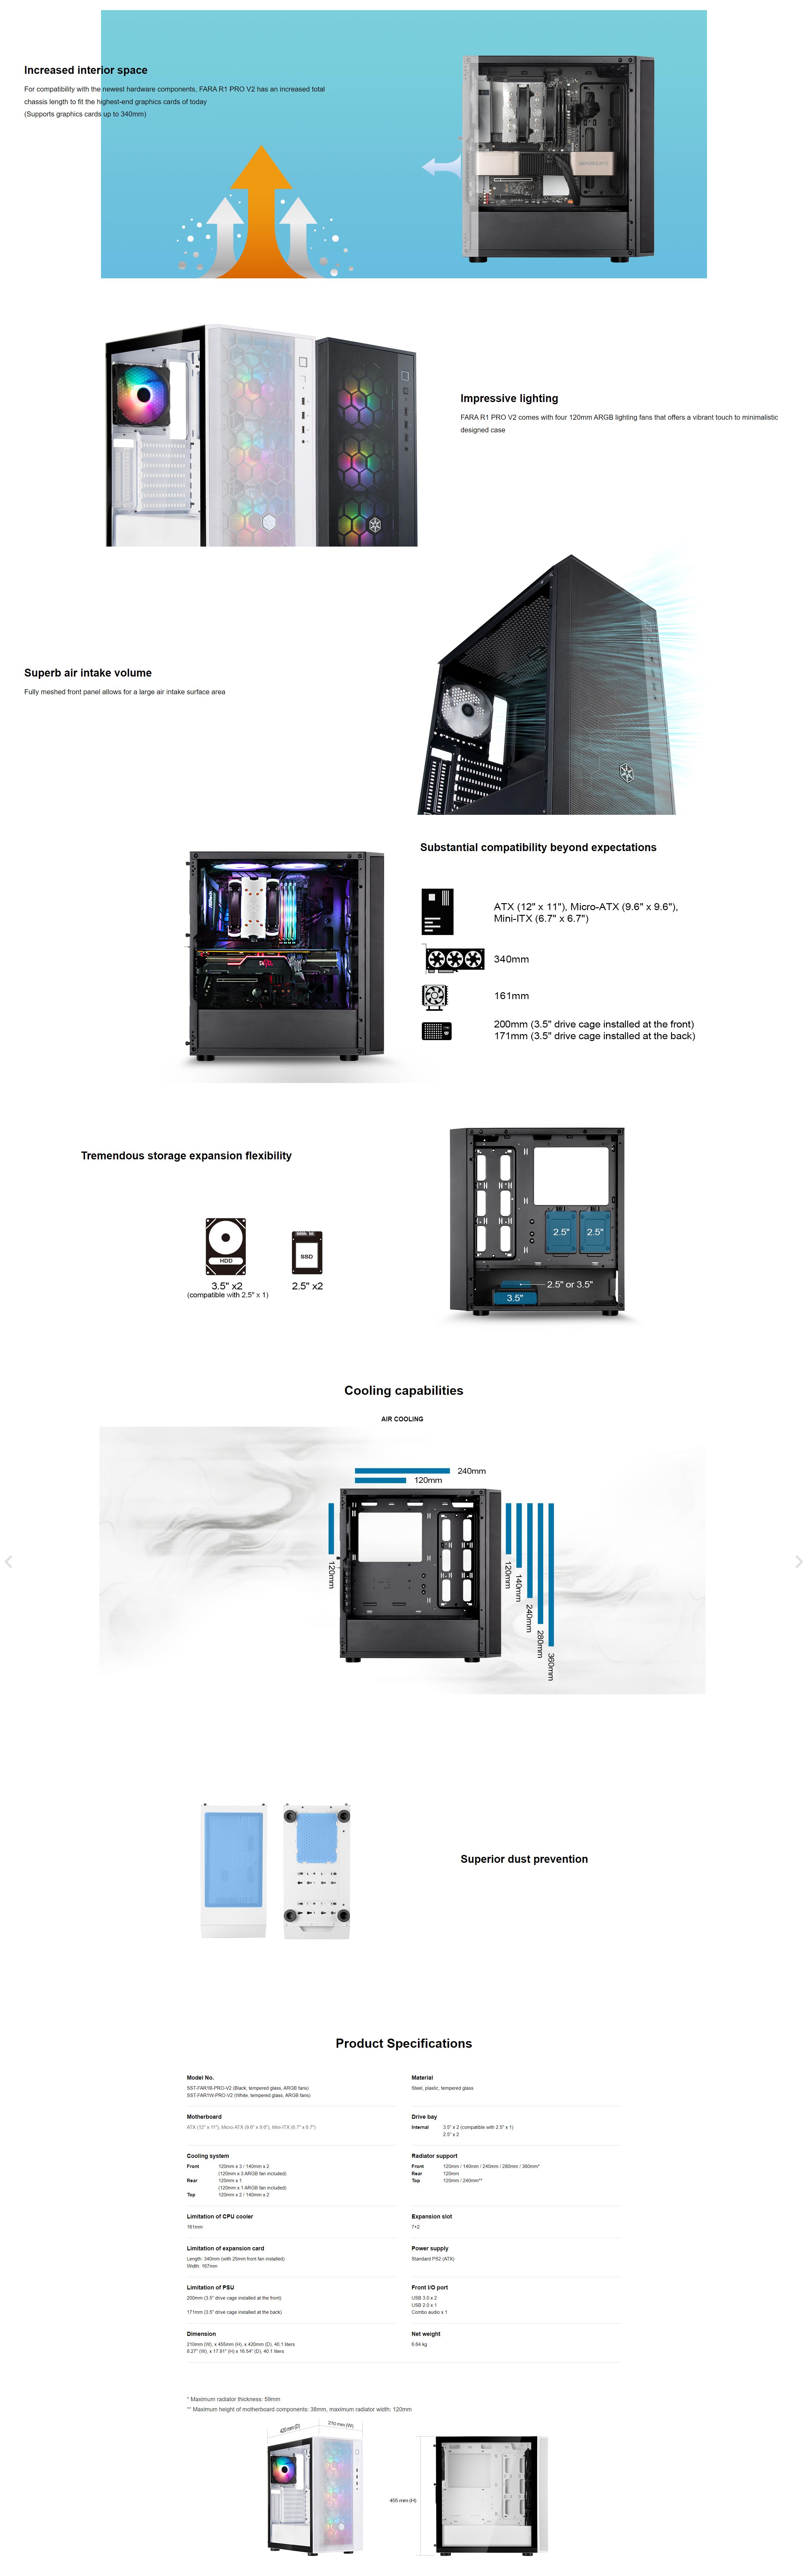 A large marketing image providing additional information about the product SilverStone FARA R1 Pro V2 Mid Tower Case - White - Additional alt info not provided